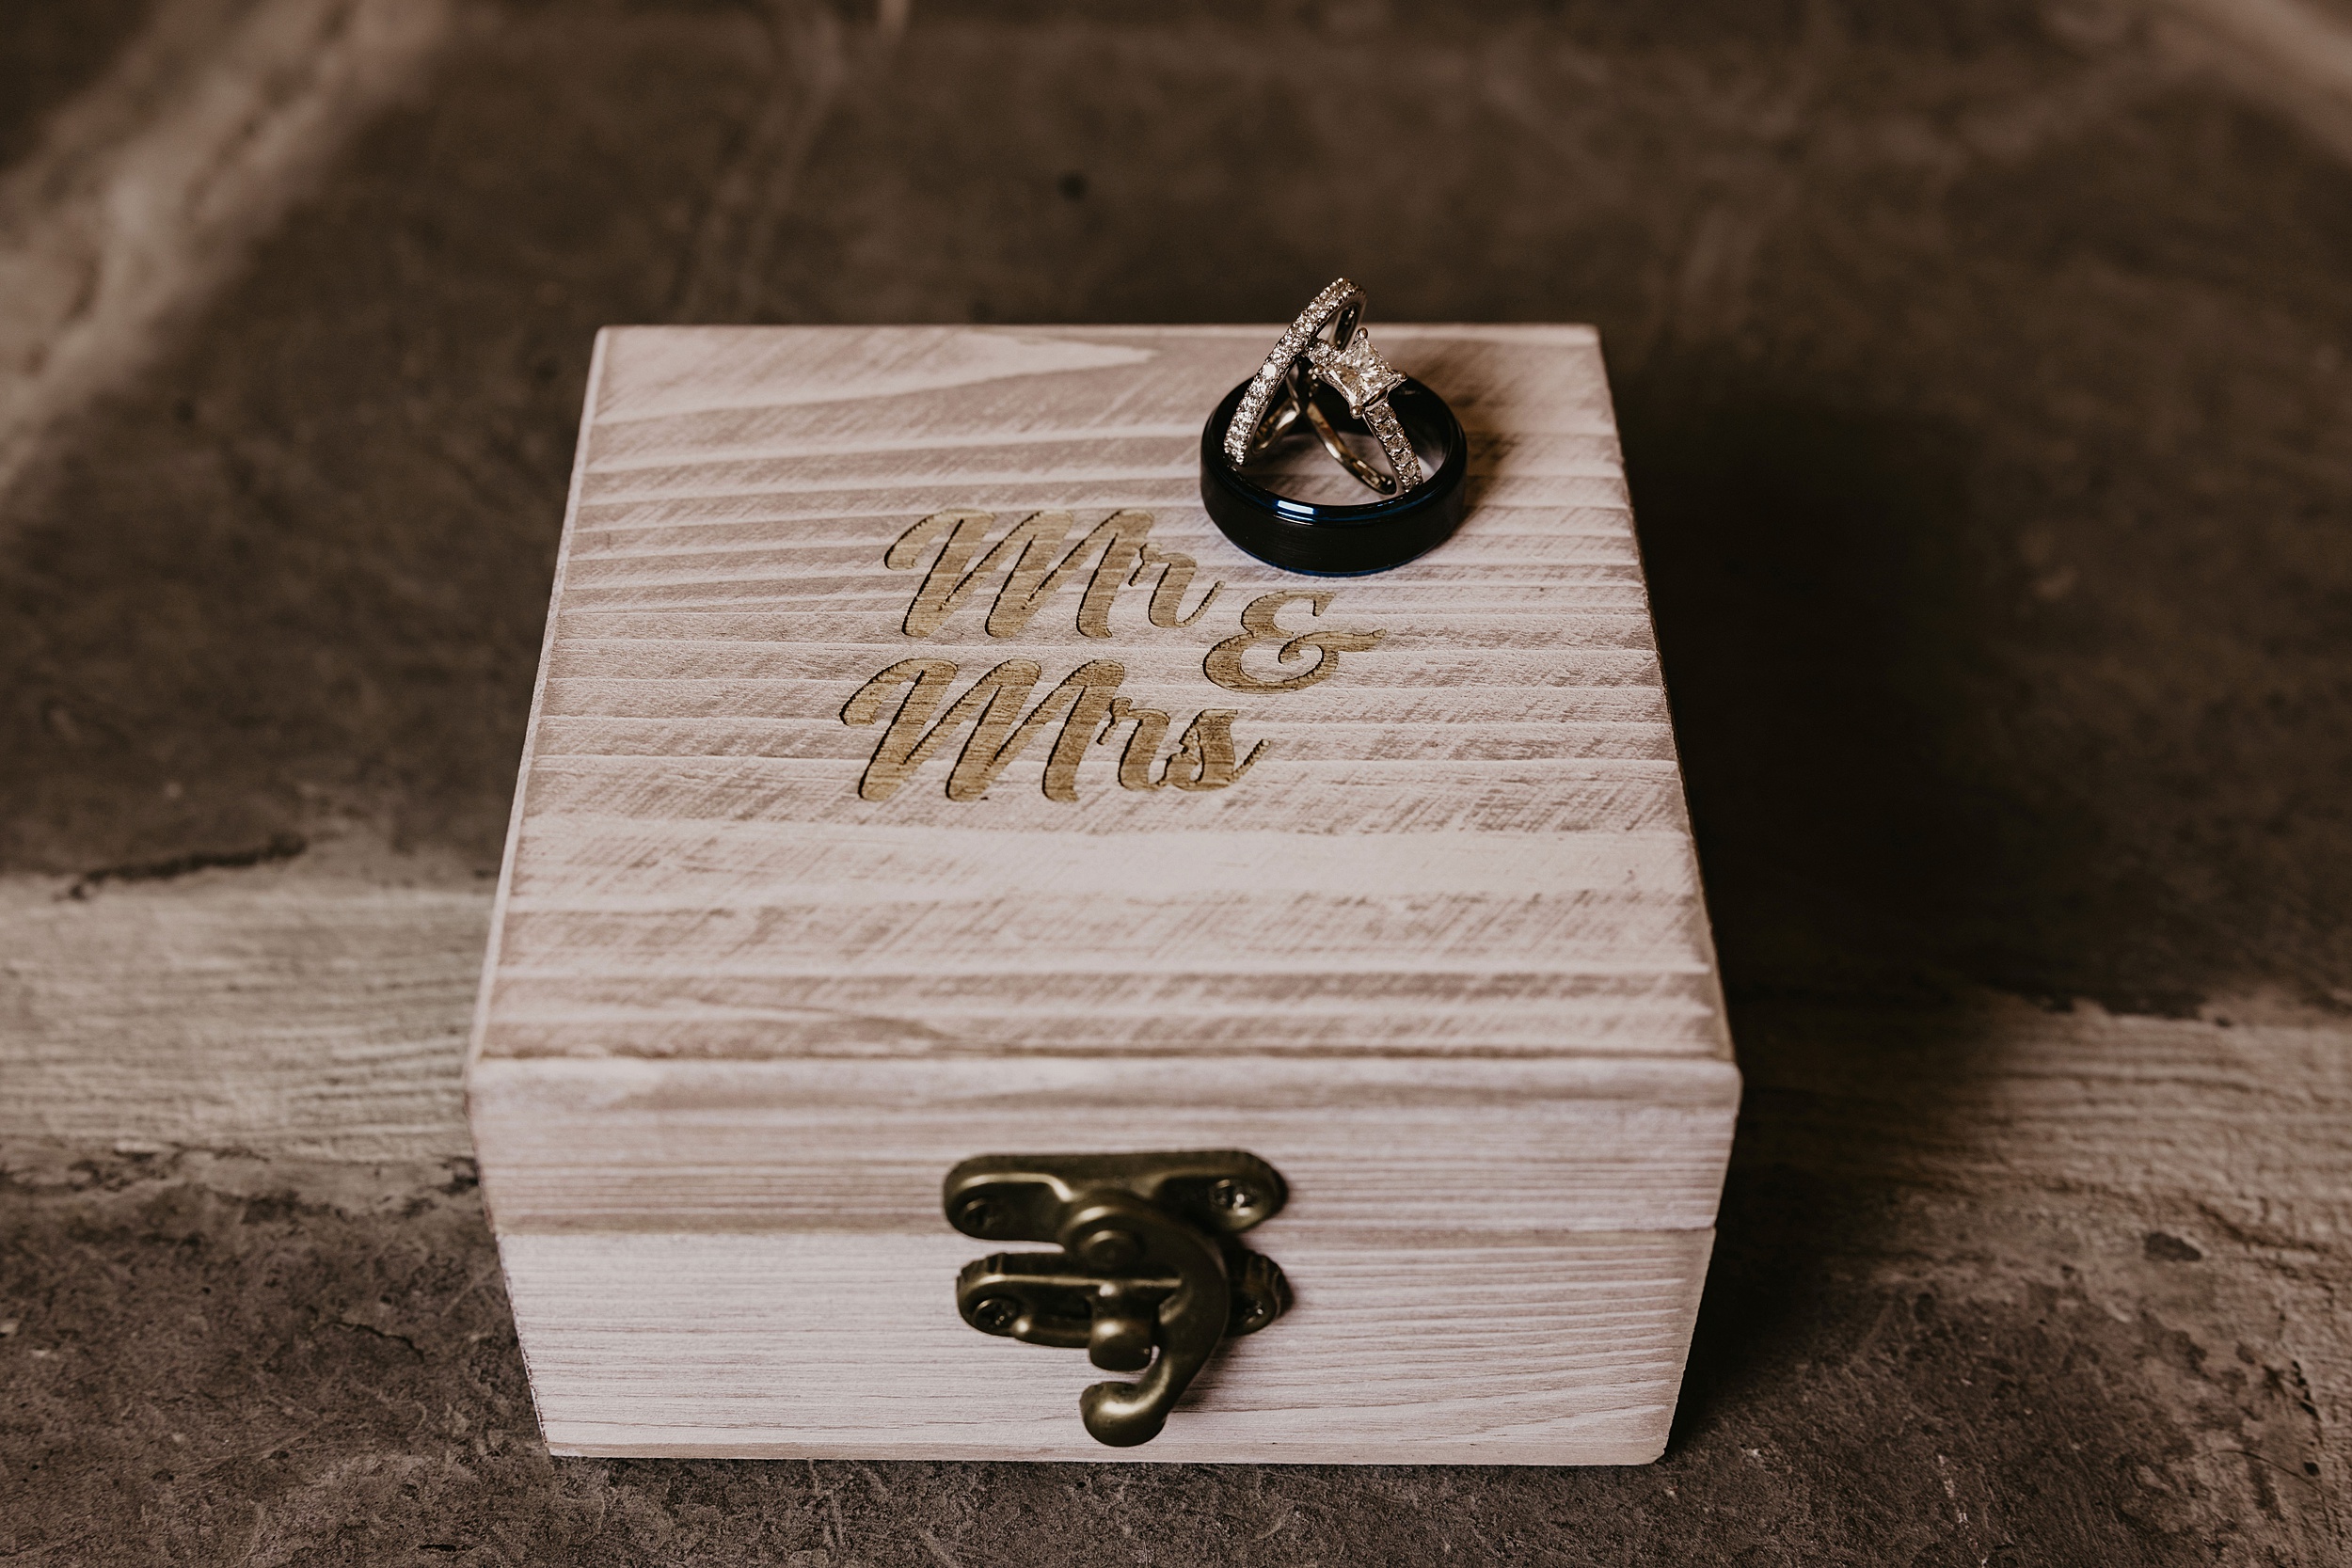 Details of a custom engraved wooden box with rings posed on top of it